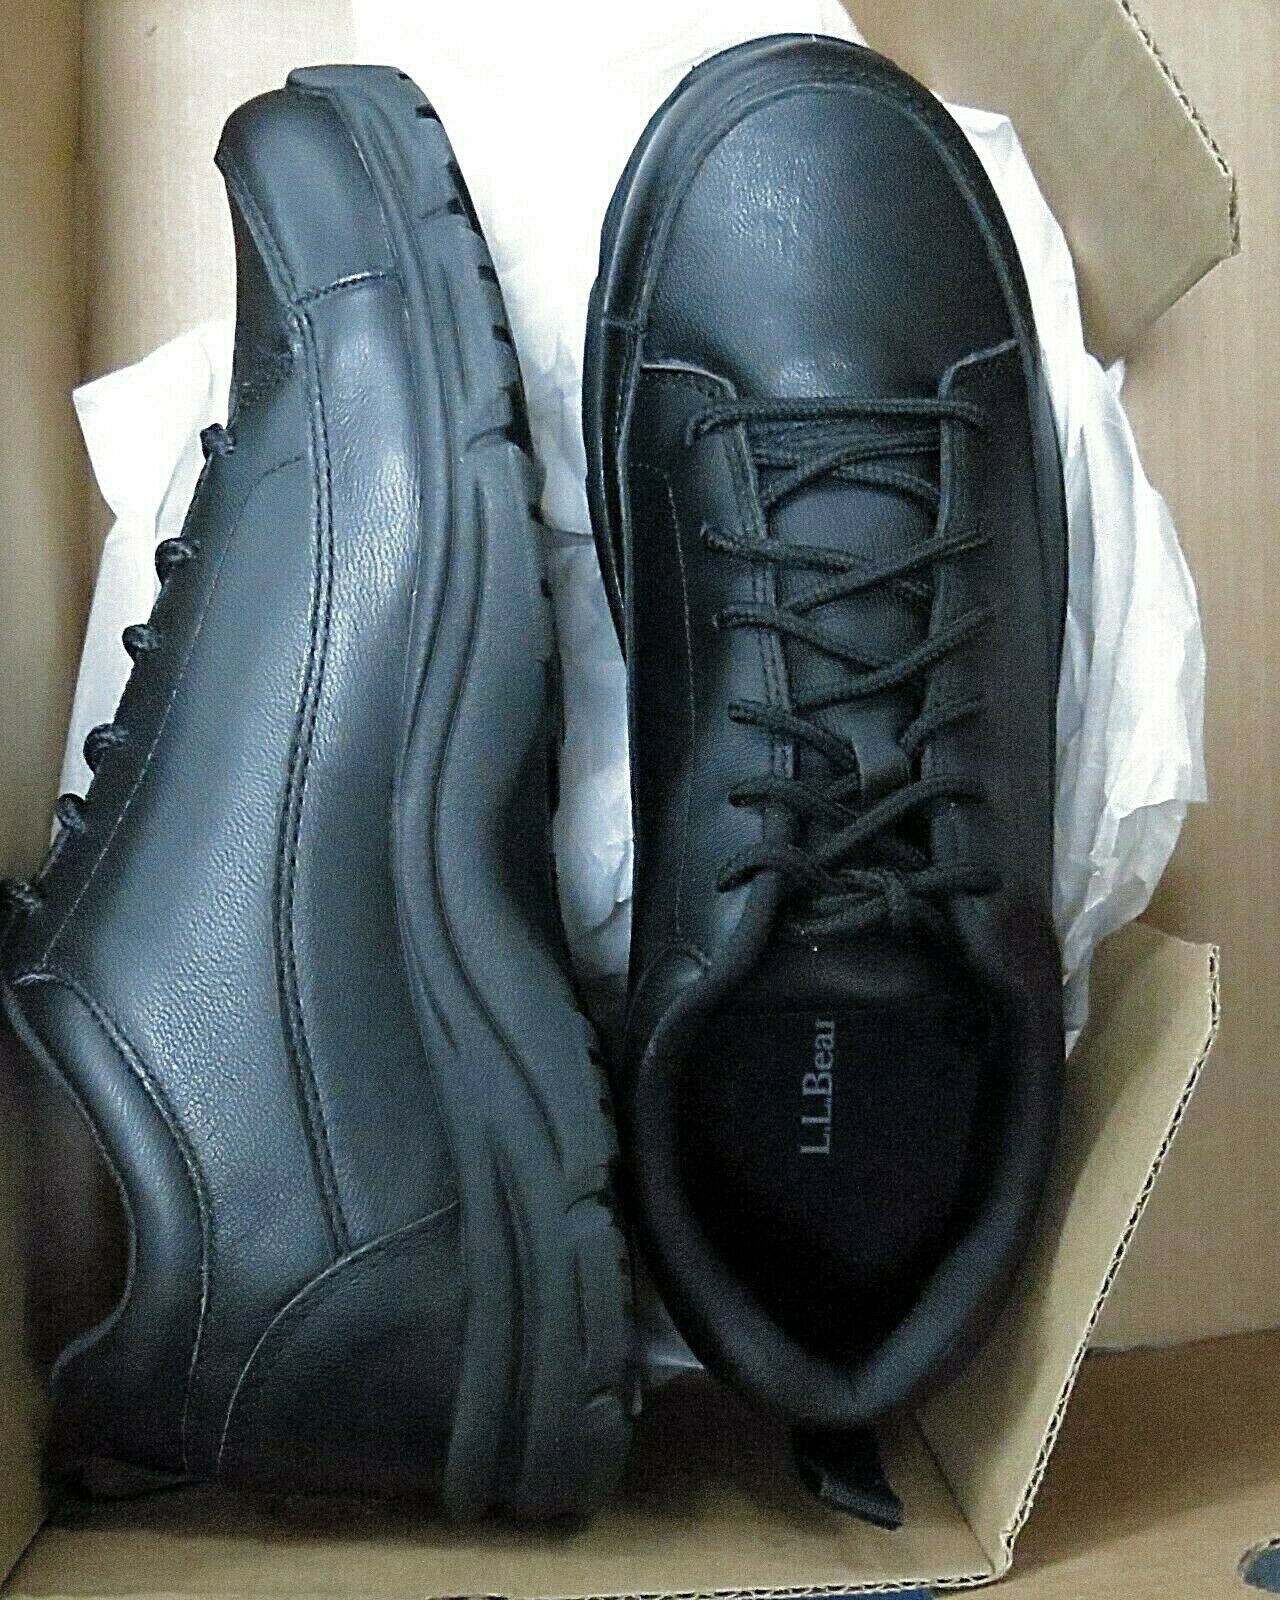 LL Bean EveryDay Athletic Walking Shoes, Black Men's Size US 8 M, Brand New, Box